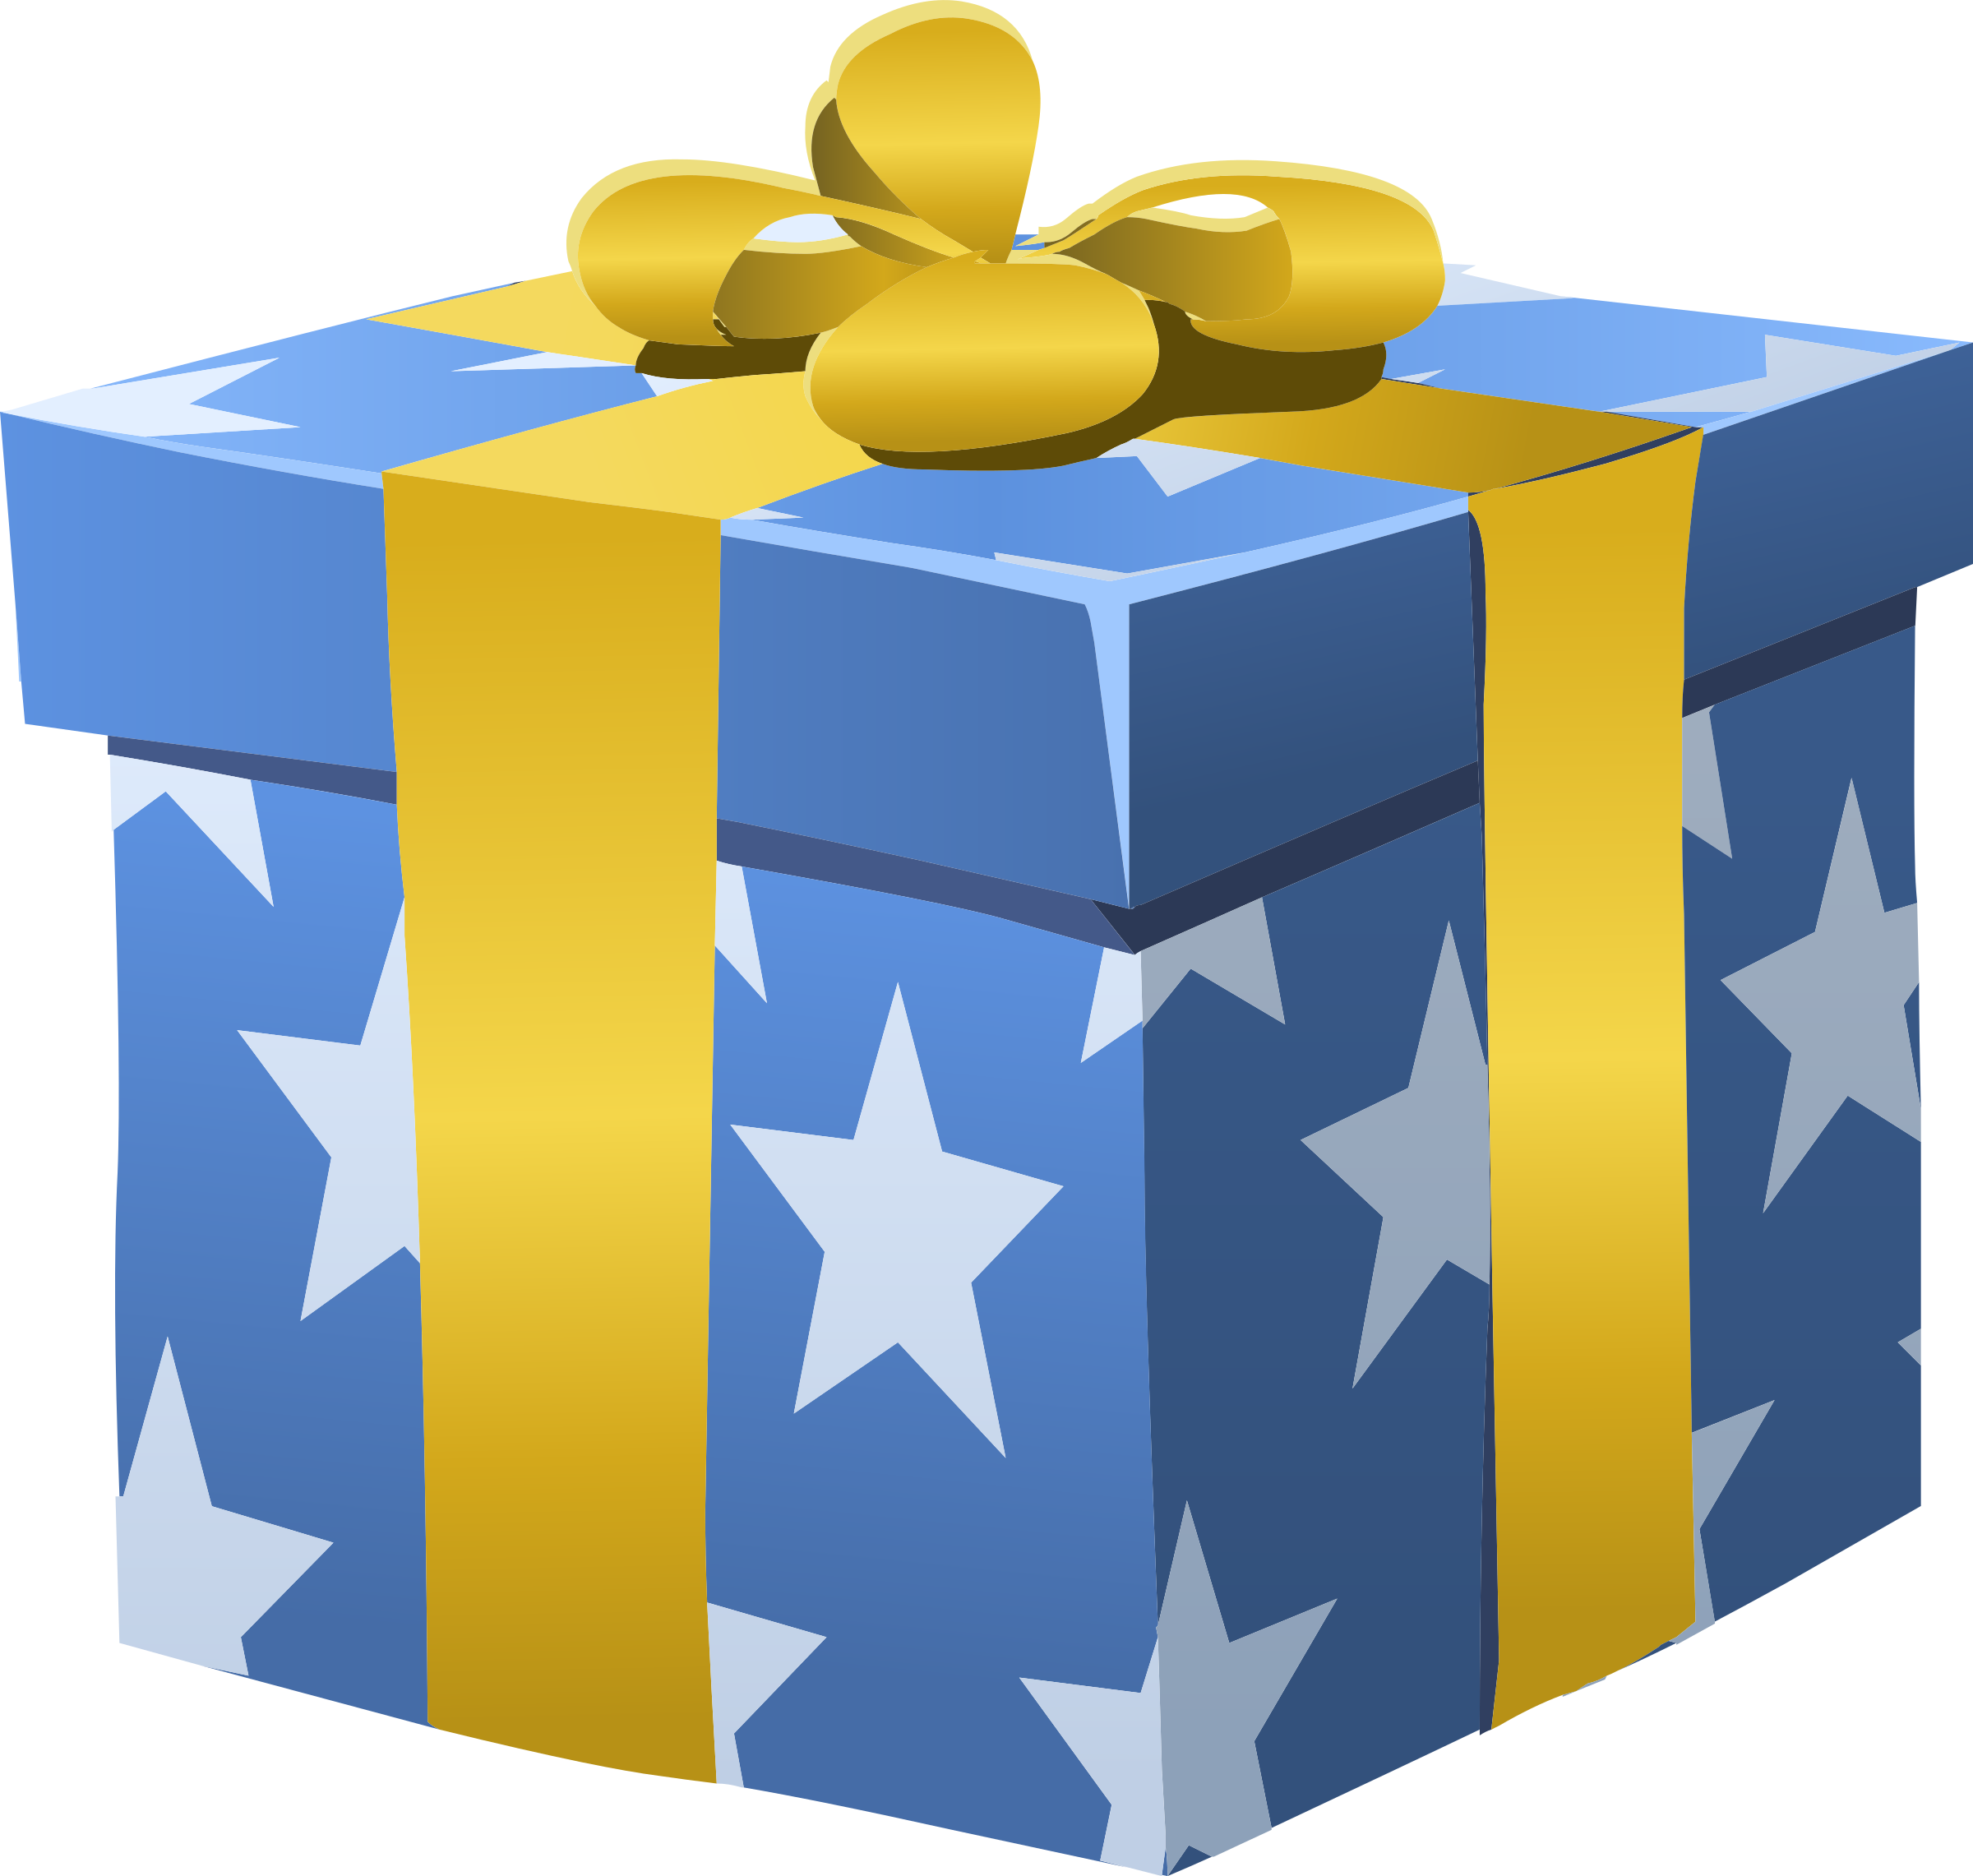 Misc bag gift box. Clipart present large